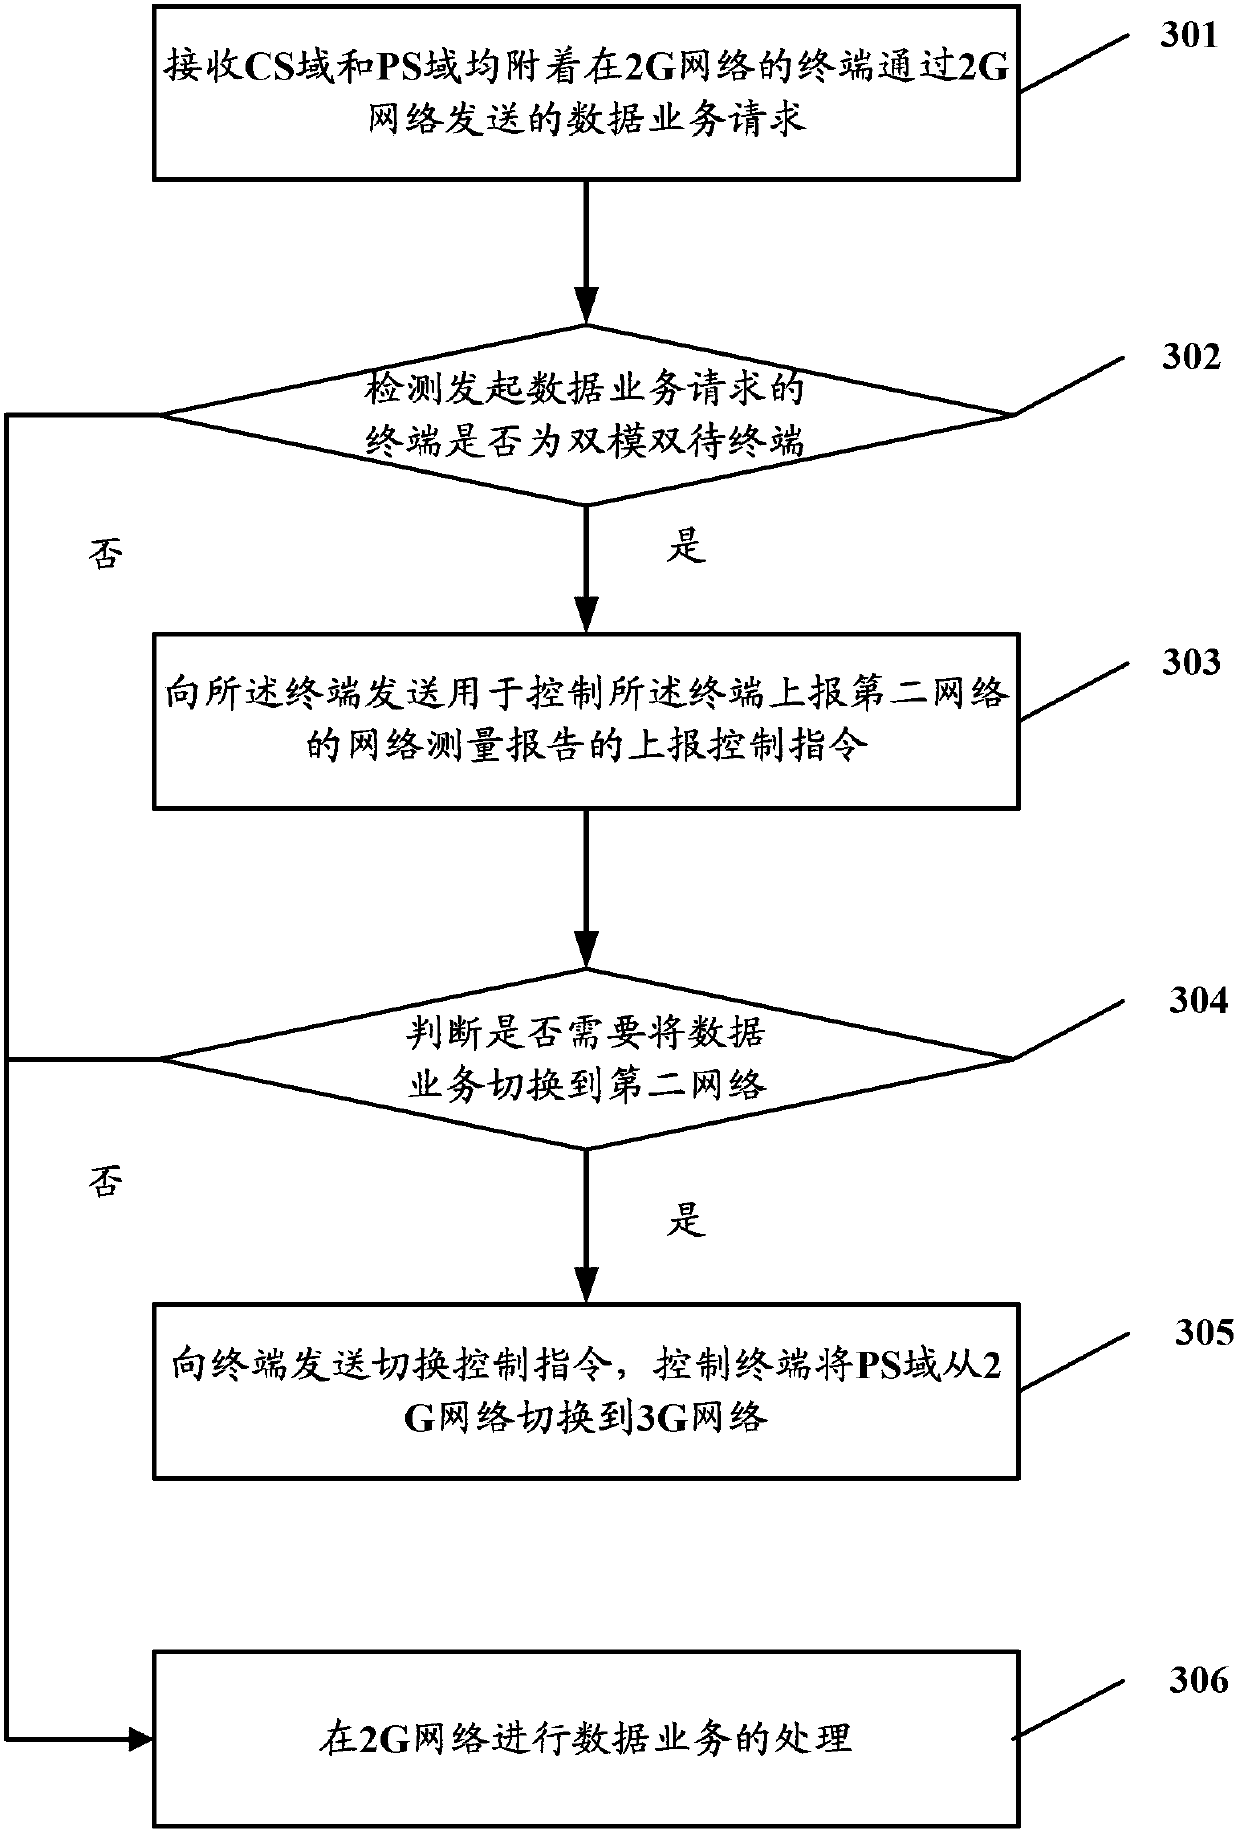 Wireless communication method and base station controller